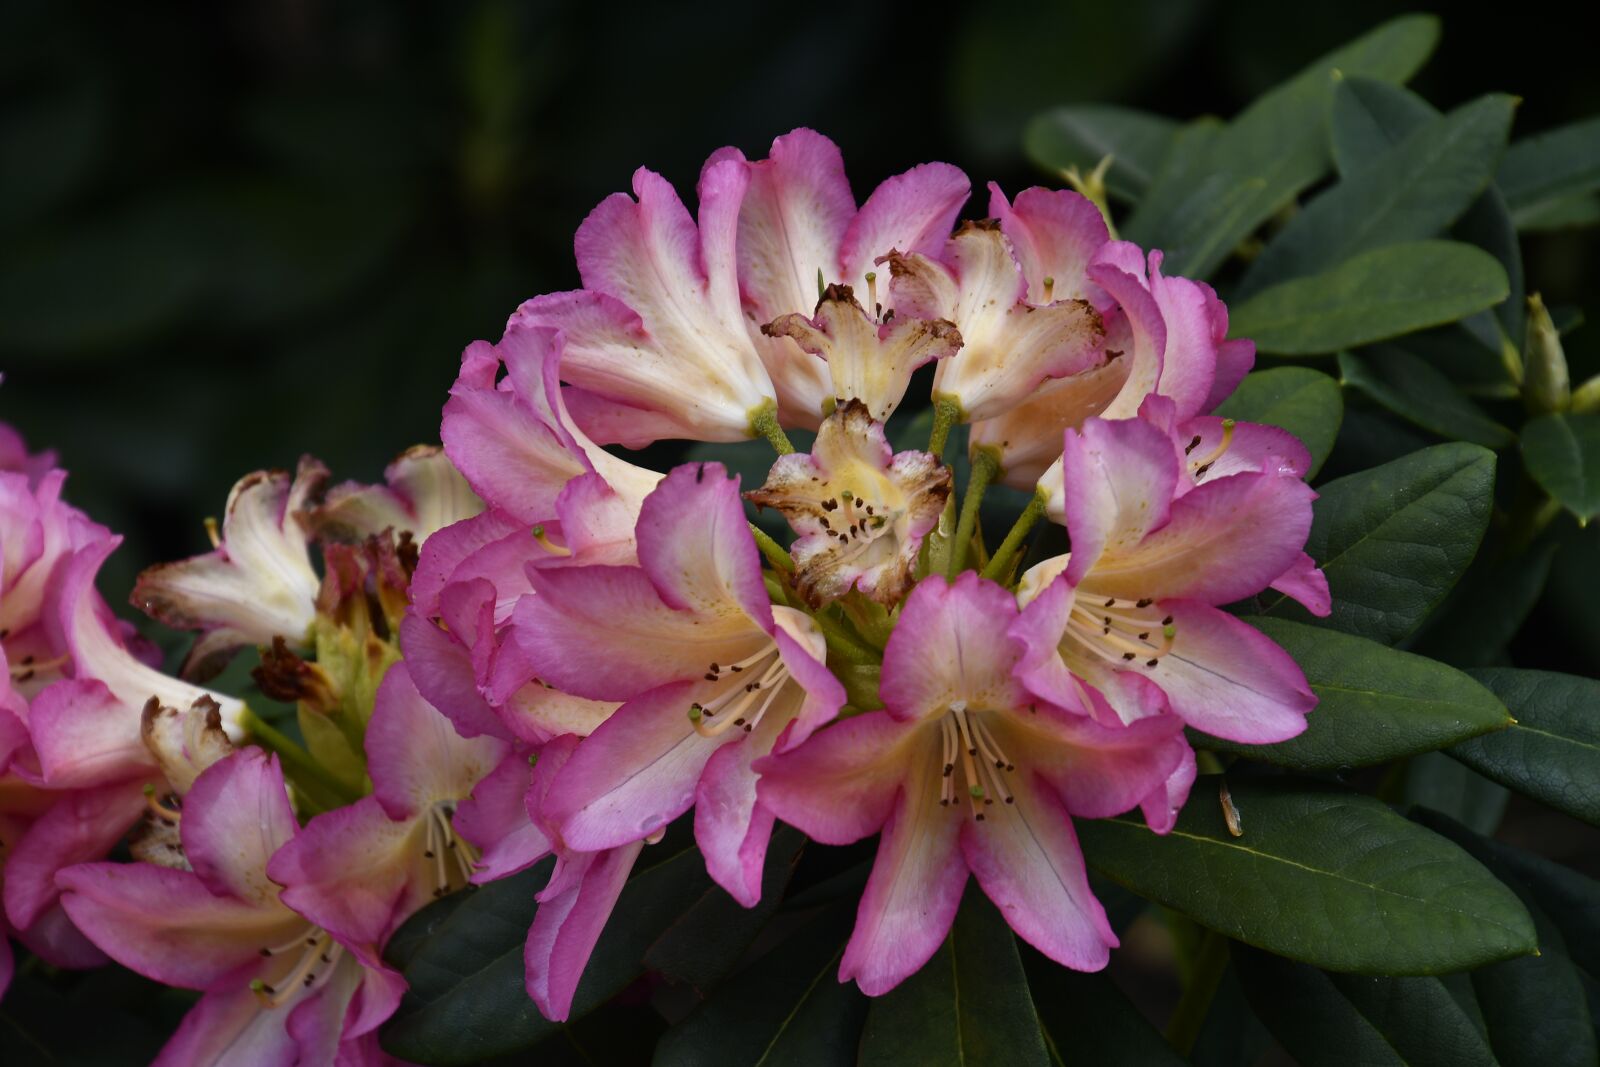 Tamron 16-300mm F3.5-6.3 Di II VC PZD Macro sample photo. Rhododendron, rhododendron flower, blossom photography